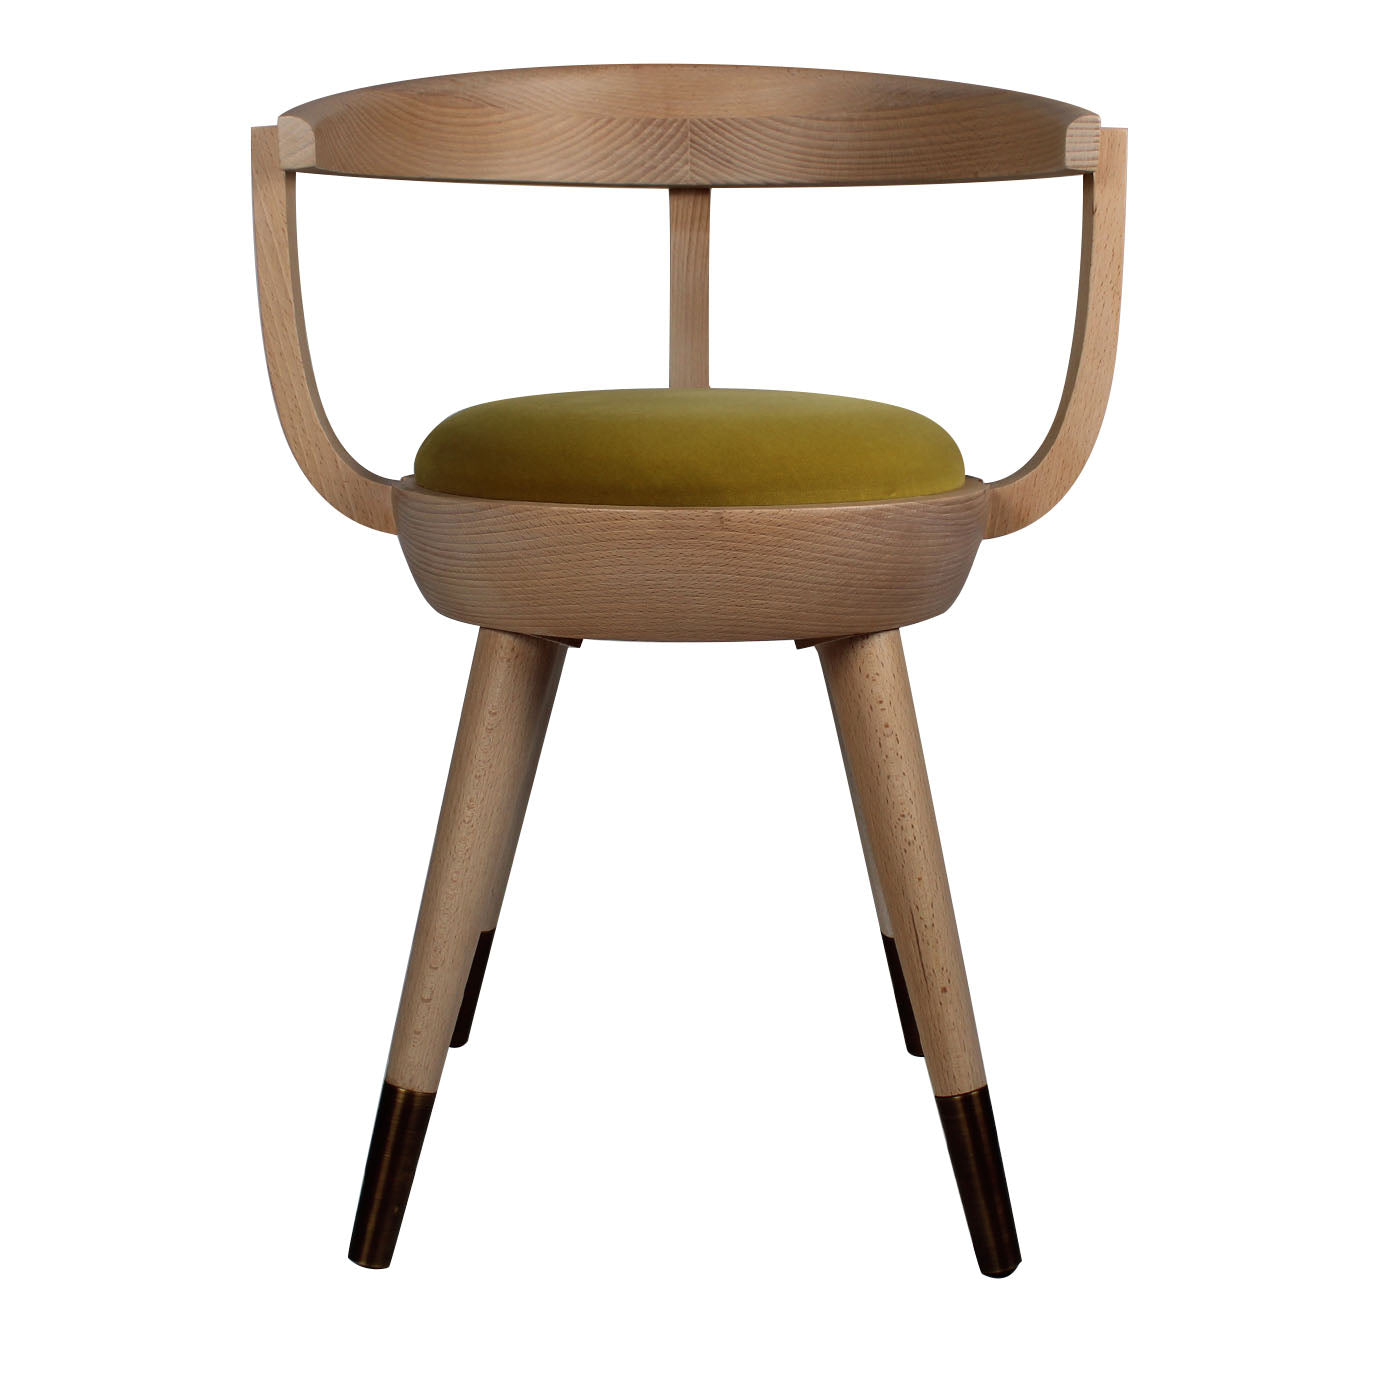 Galleon Dining Chair by Archer Humphryes Architects - Main view